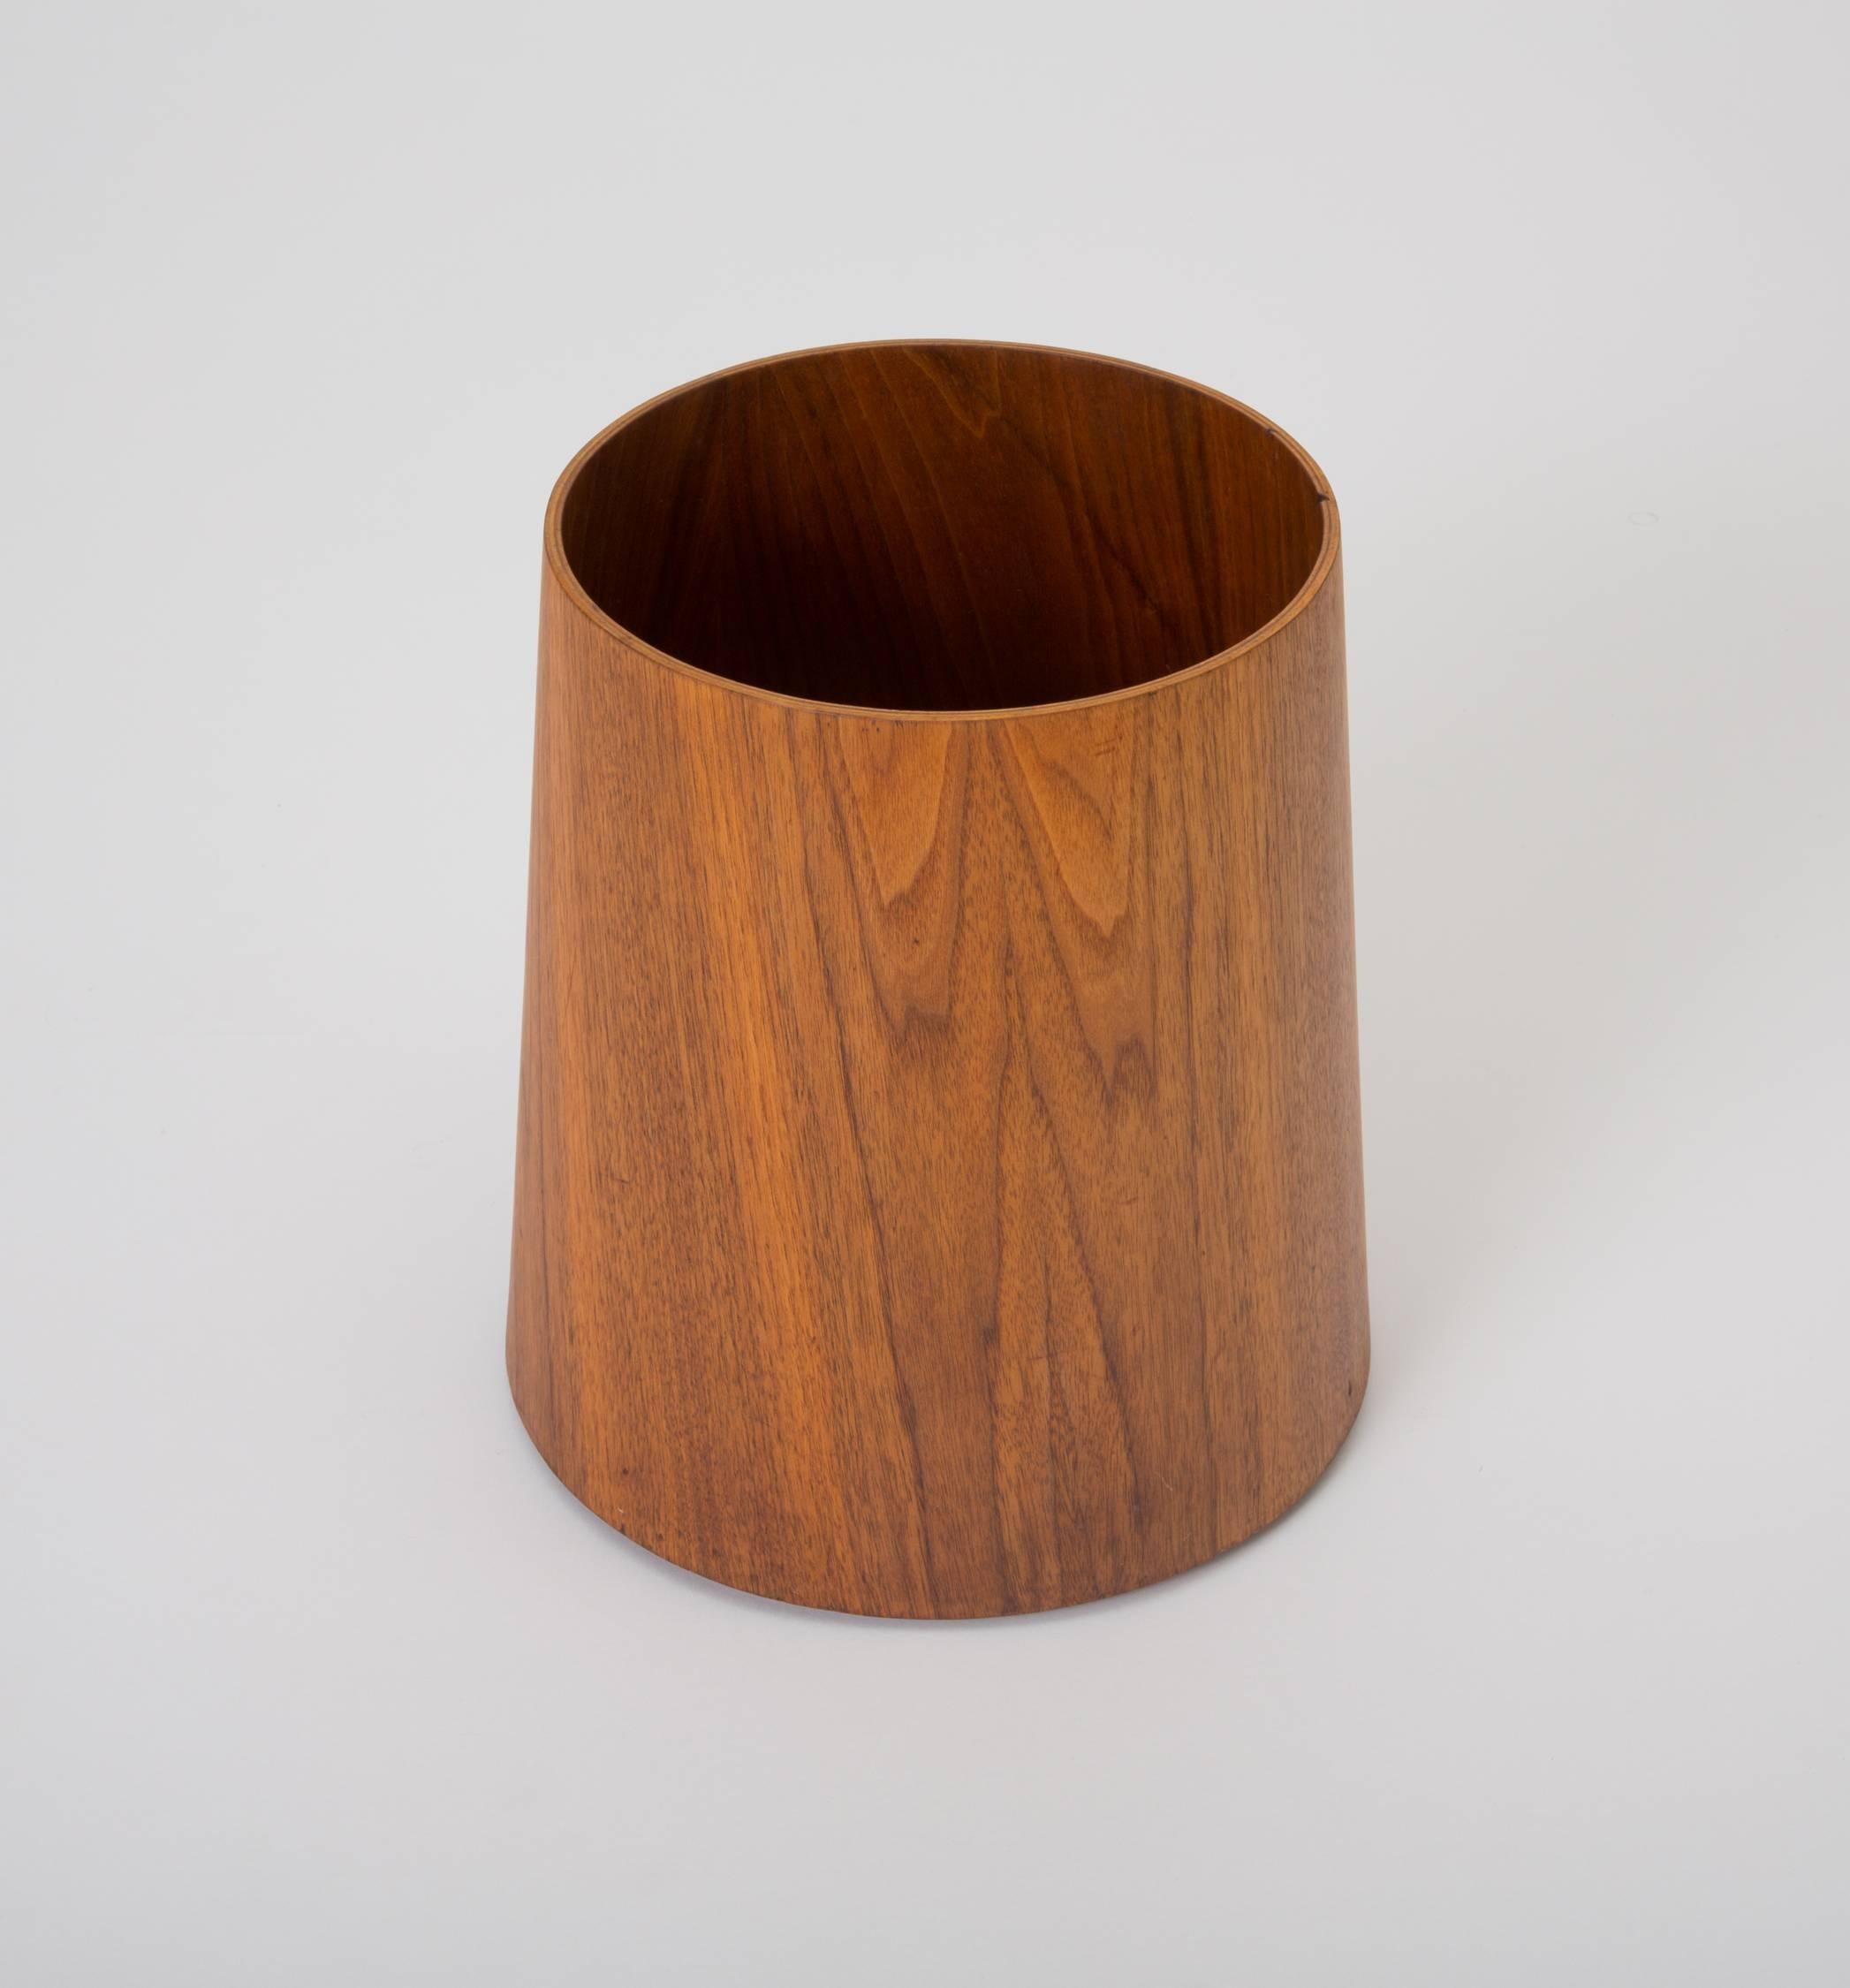 From a line of Jens Risom office accessories manufactured by his company, Jens Risom Design, this walnut wastebasket has a wide base and tapers at a gentle angle toward the mouth of the receptacle. The canister’s interior is finished in walnut